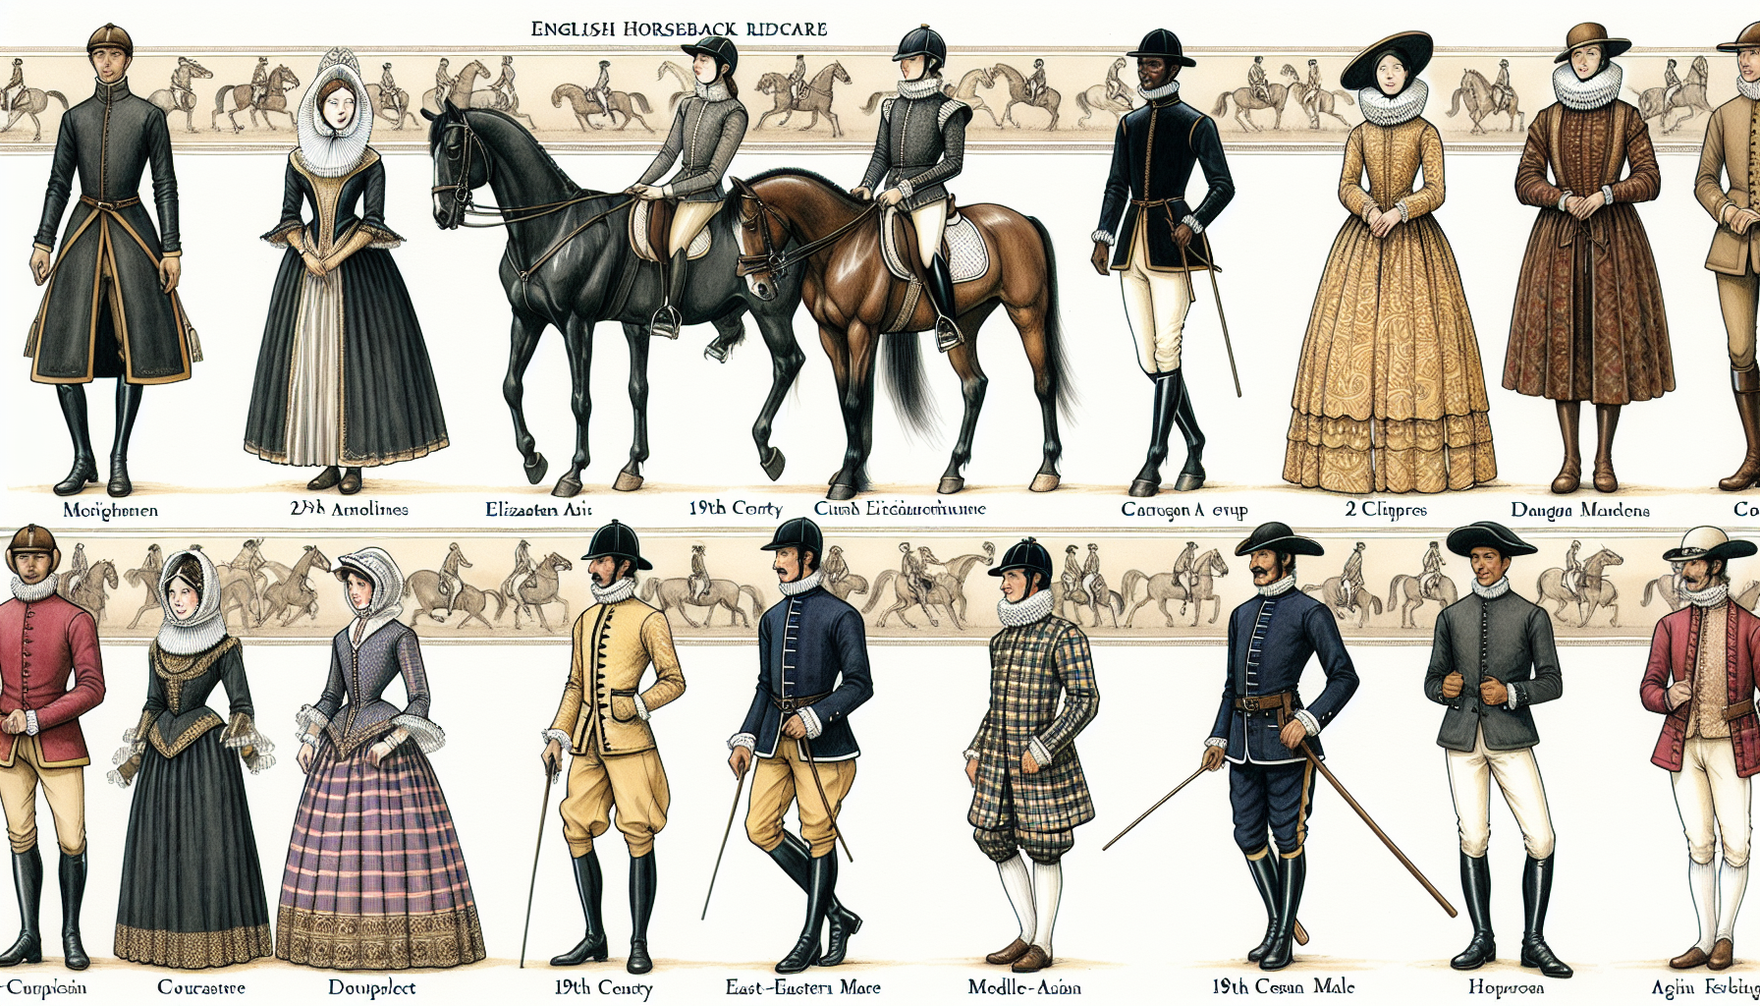 An illustrated timeline depicting the evolution of English horseback riding attire. The timeline should start from medieval times showing a male rider wearing a simple tunic and trousers and a female 